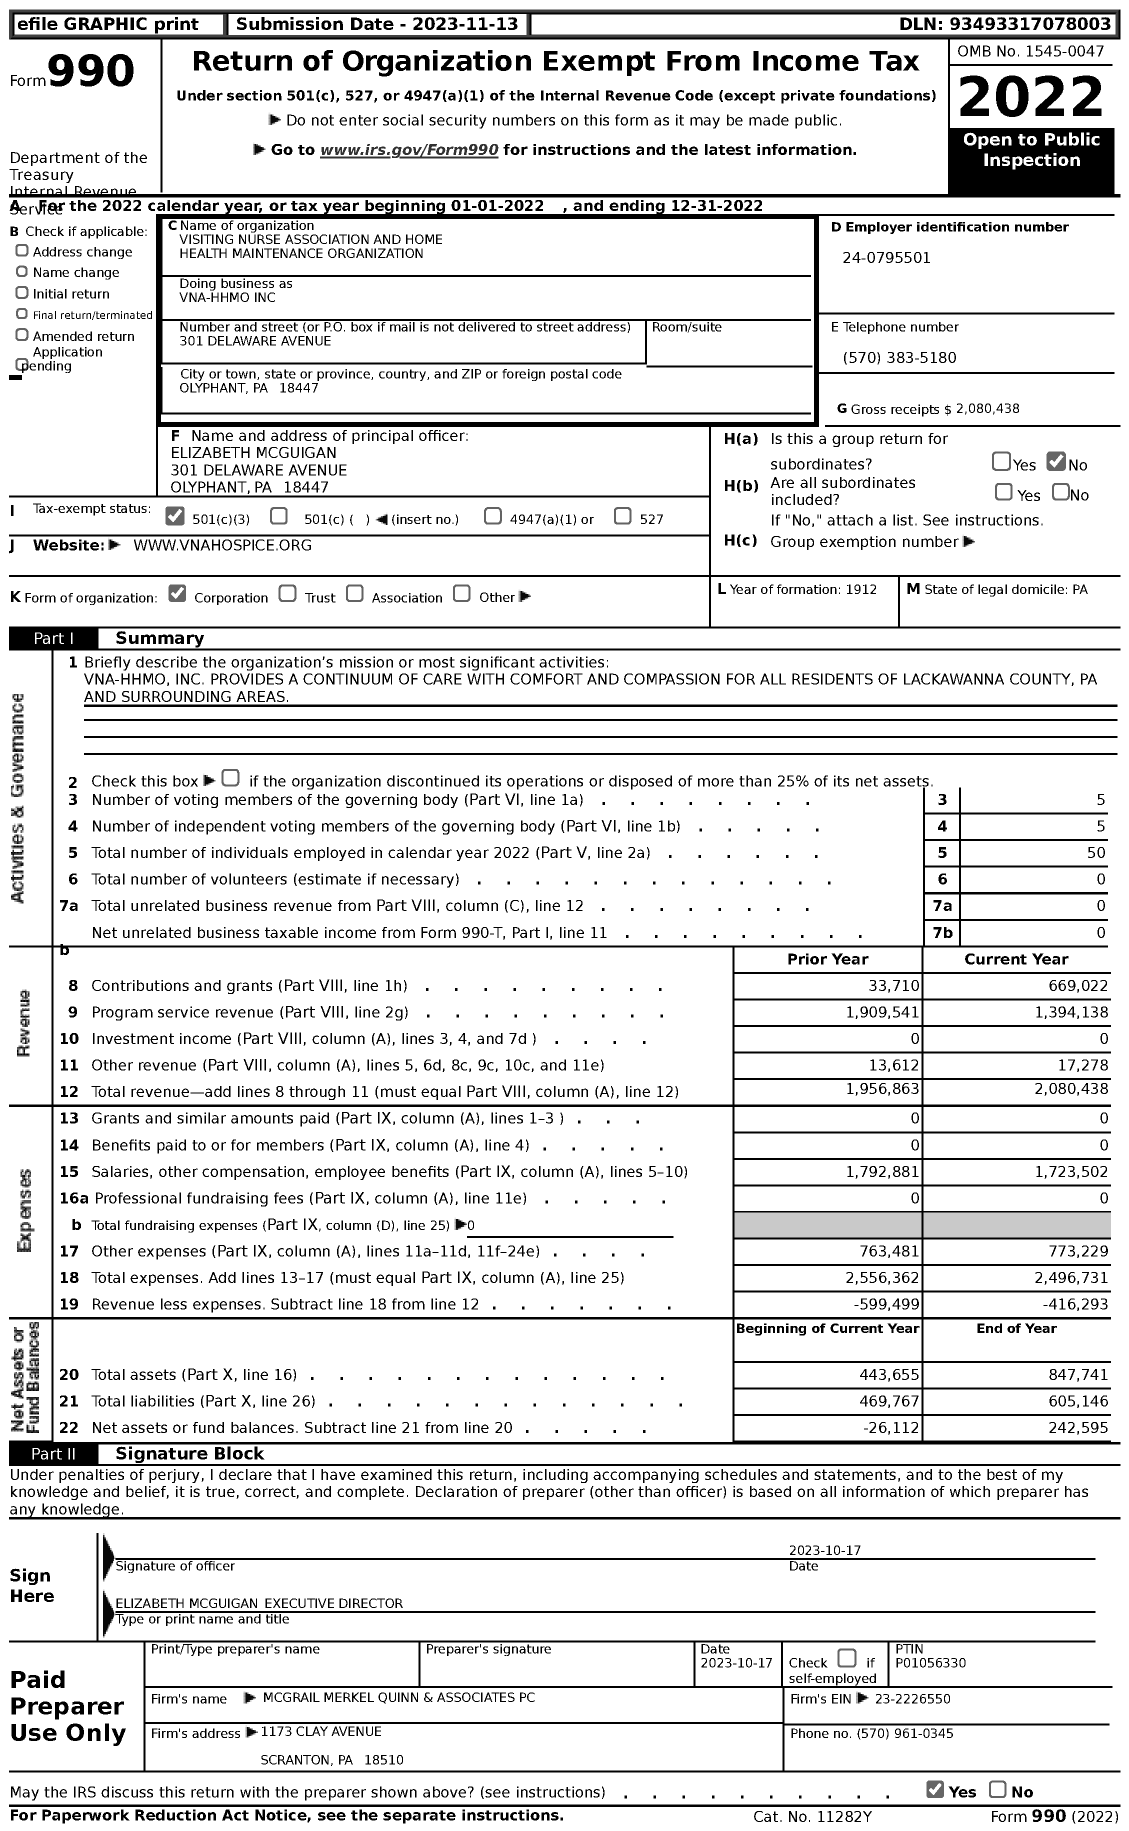 Image of first page of 2022 Form 990 for Visiting Nurse Association and Home Health Maintenance Organization (VNA-HHMO)